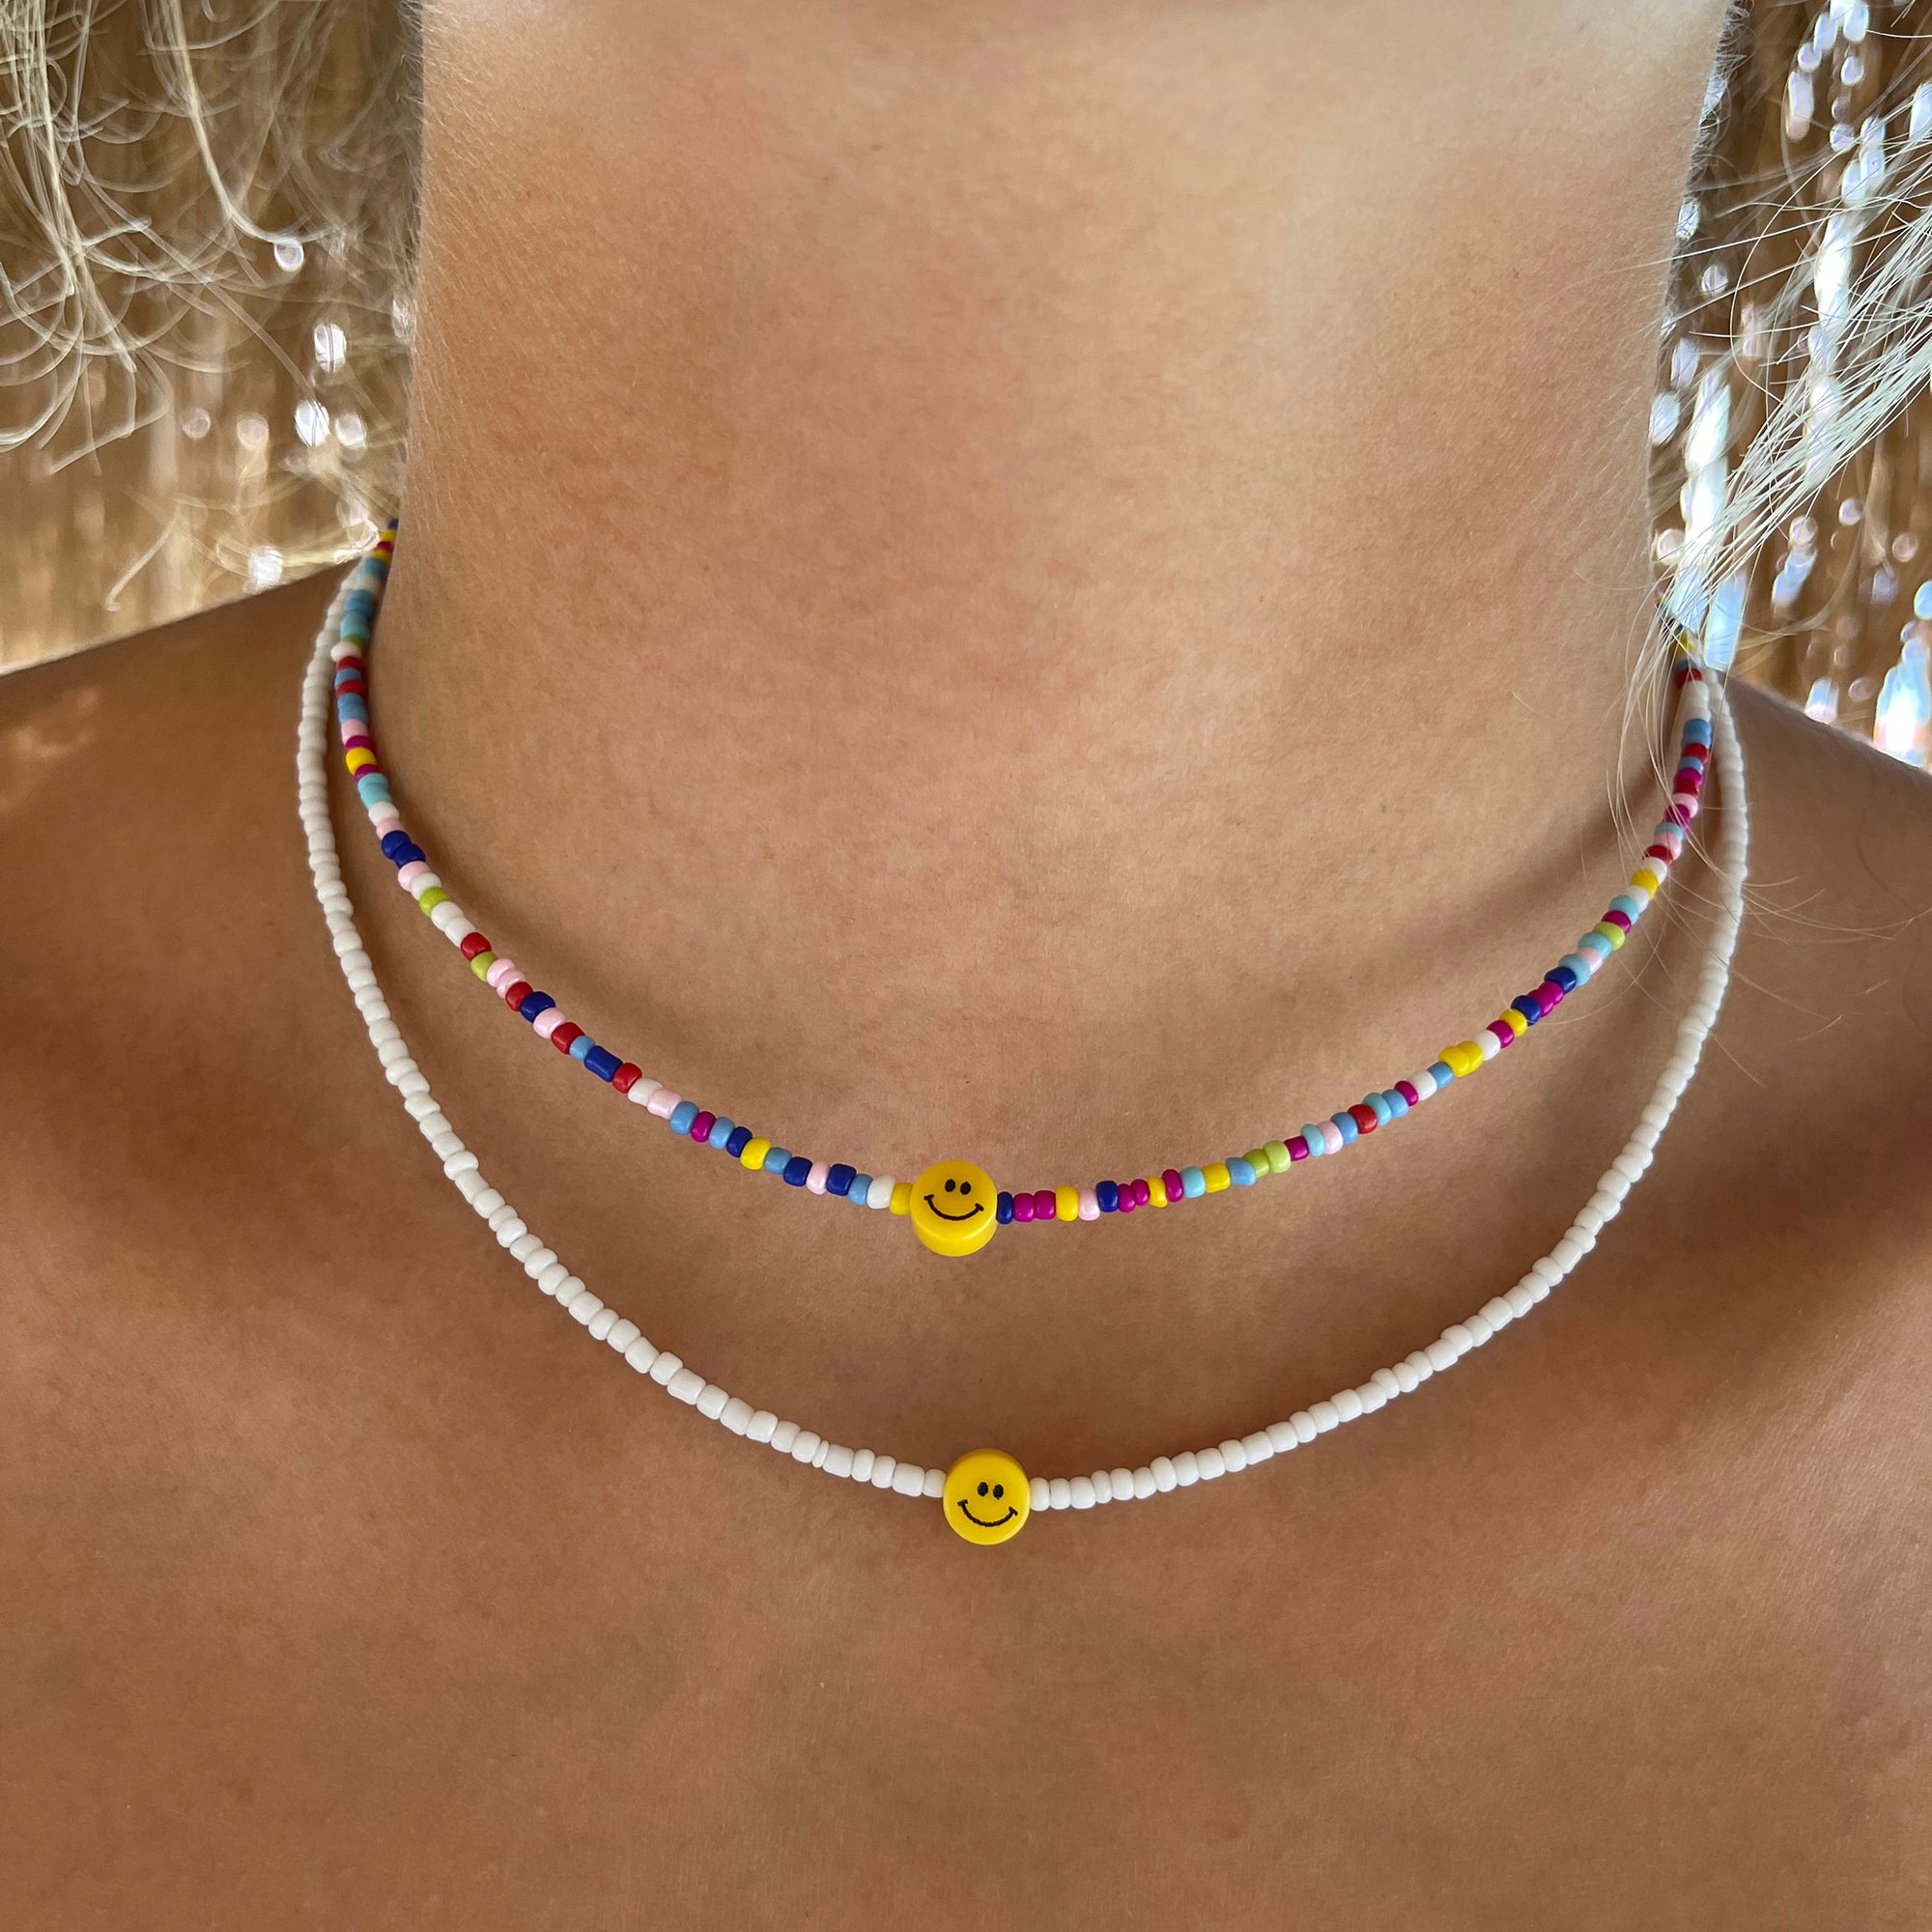 Beaded Bead Necklace - How Did You Make This? | Luxe DIY